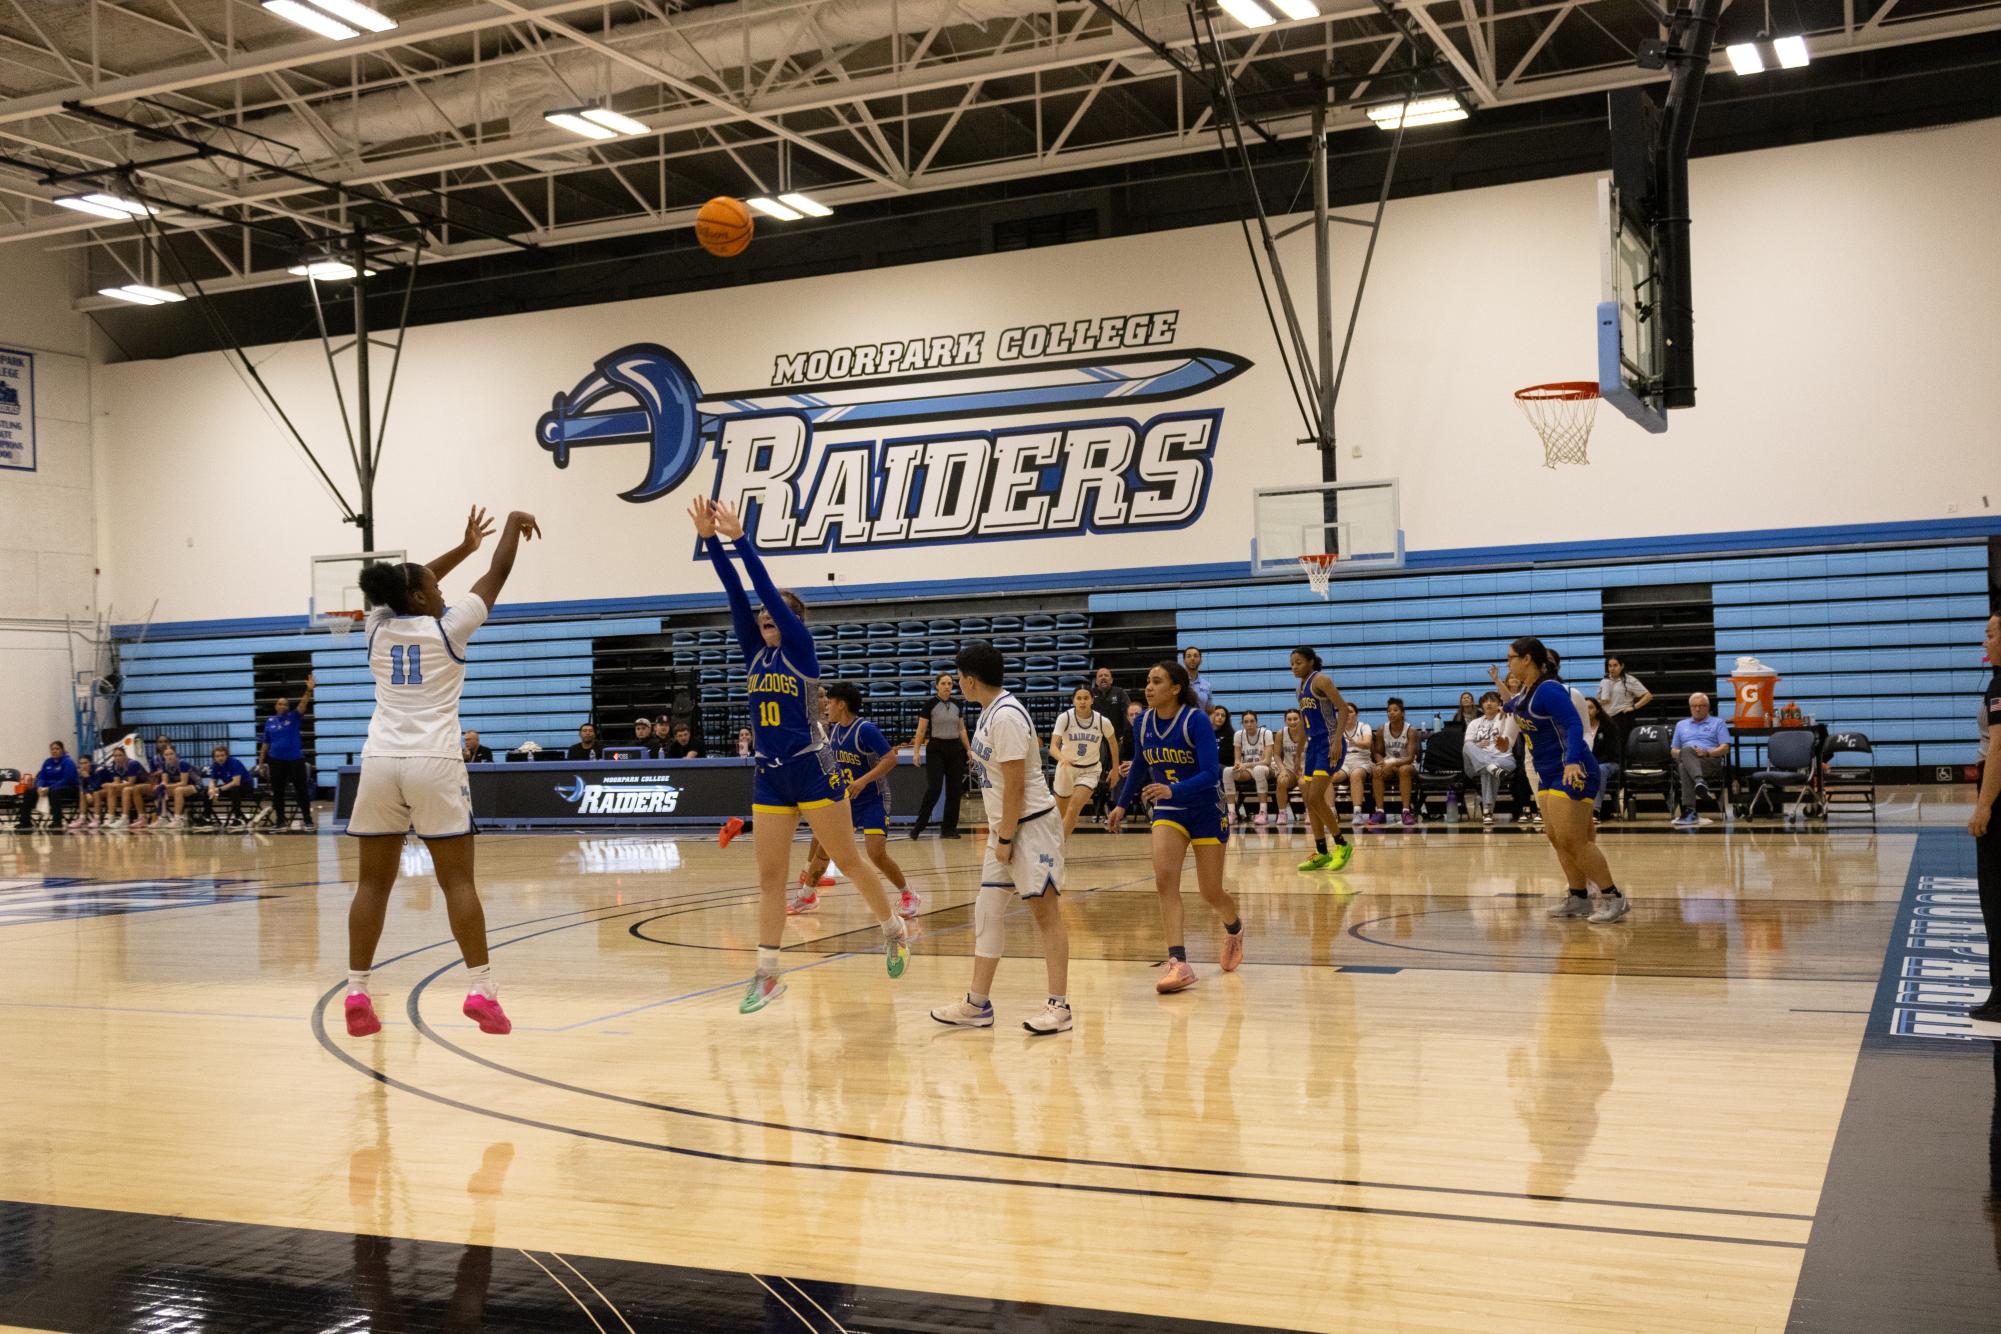 During the Moorpark Community College Women's Basketball game, Moorpark College's Raider Mika Jarrett (left, #11) makes a 3 point shot despite Allan Hancock College's Bulldog Katie Mathews' (#10) attempt to block. Giselle Calderon (#23), Rebecca Saidoff (#21), Makena Melito (#5 Moorpark), Chyanna Tell (#5 Allan Hancok), India Dowling-Green (#1), and Pheobe Becerra (#30) continue the game (from left to right). The Moorpark Raiders played in their home court at Moorpark Community College in Moorpark, CA against Allan Hancock College of Santa Maria, CA on February 14, 2024. Photo by Victoria McLaughlin